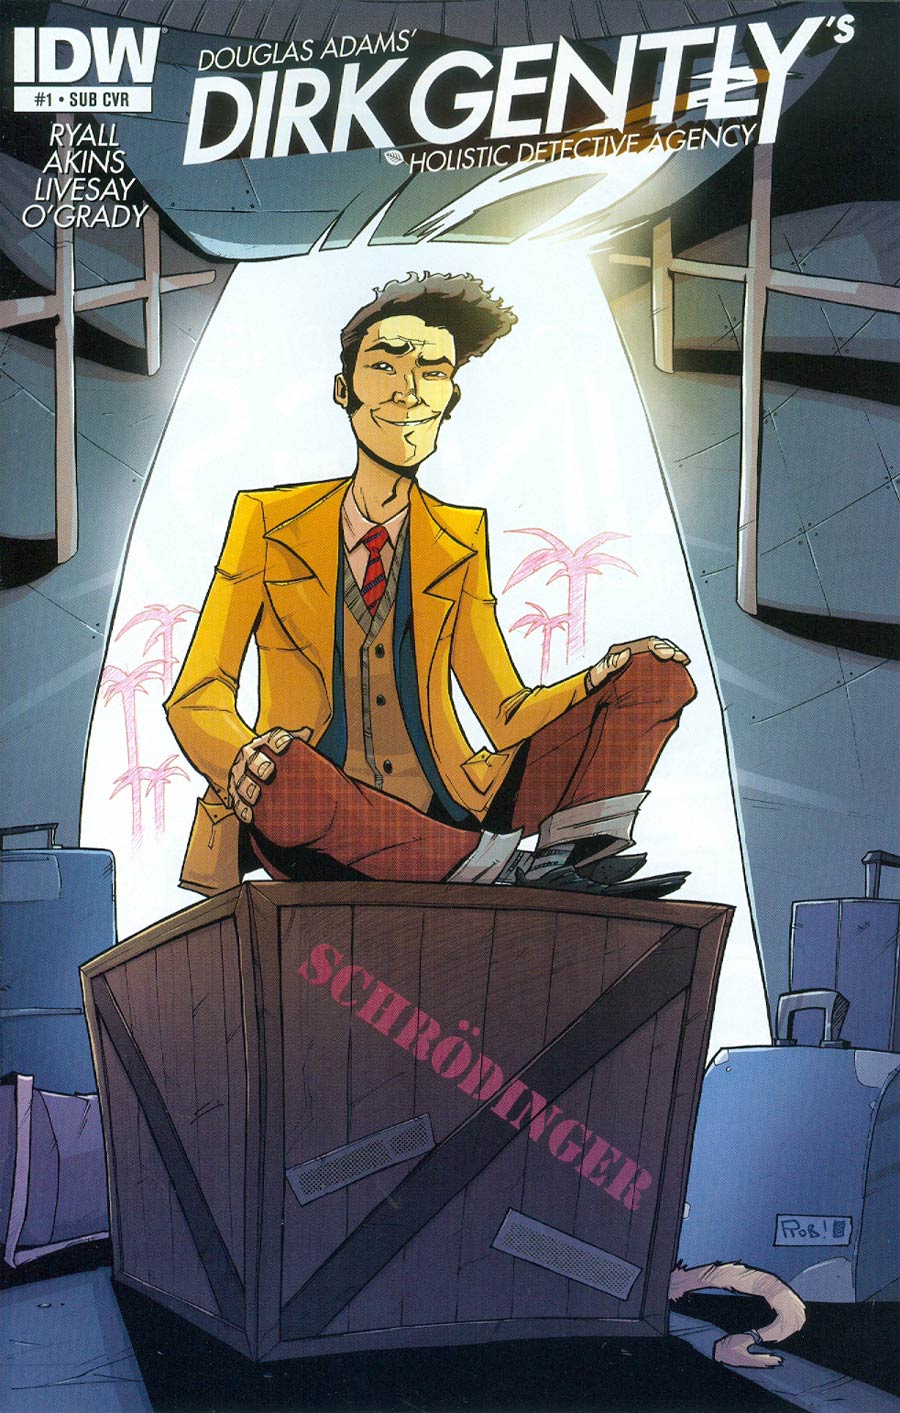 Dirk Gently's Holistic Detective Agency (2015) #1 "Subscription" Variant